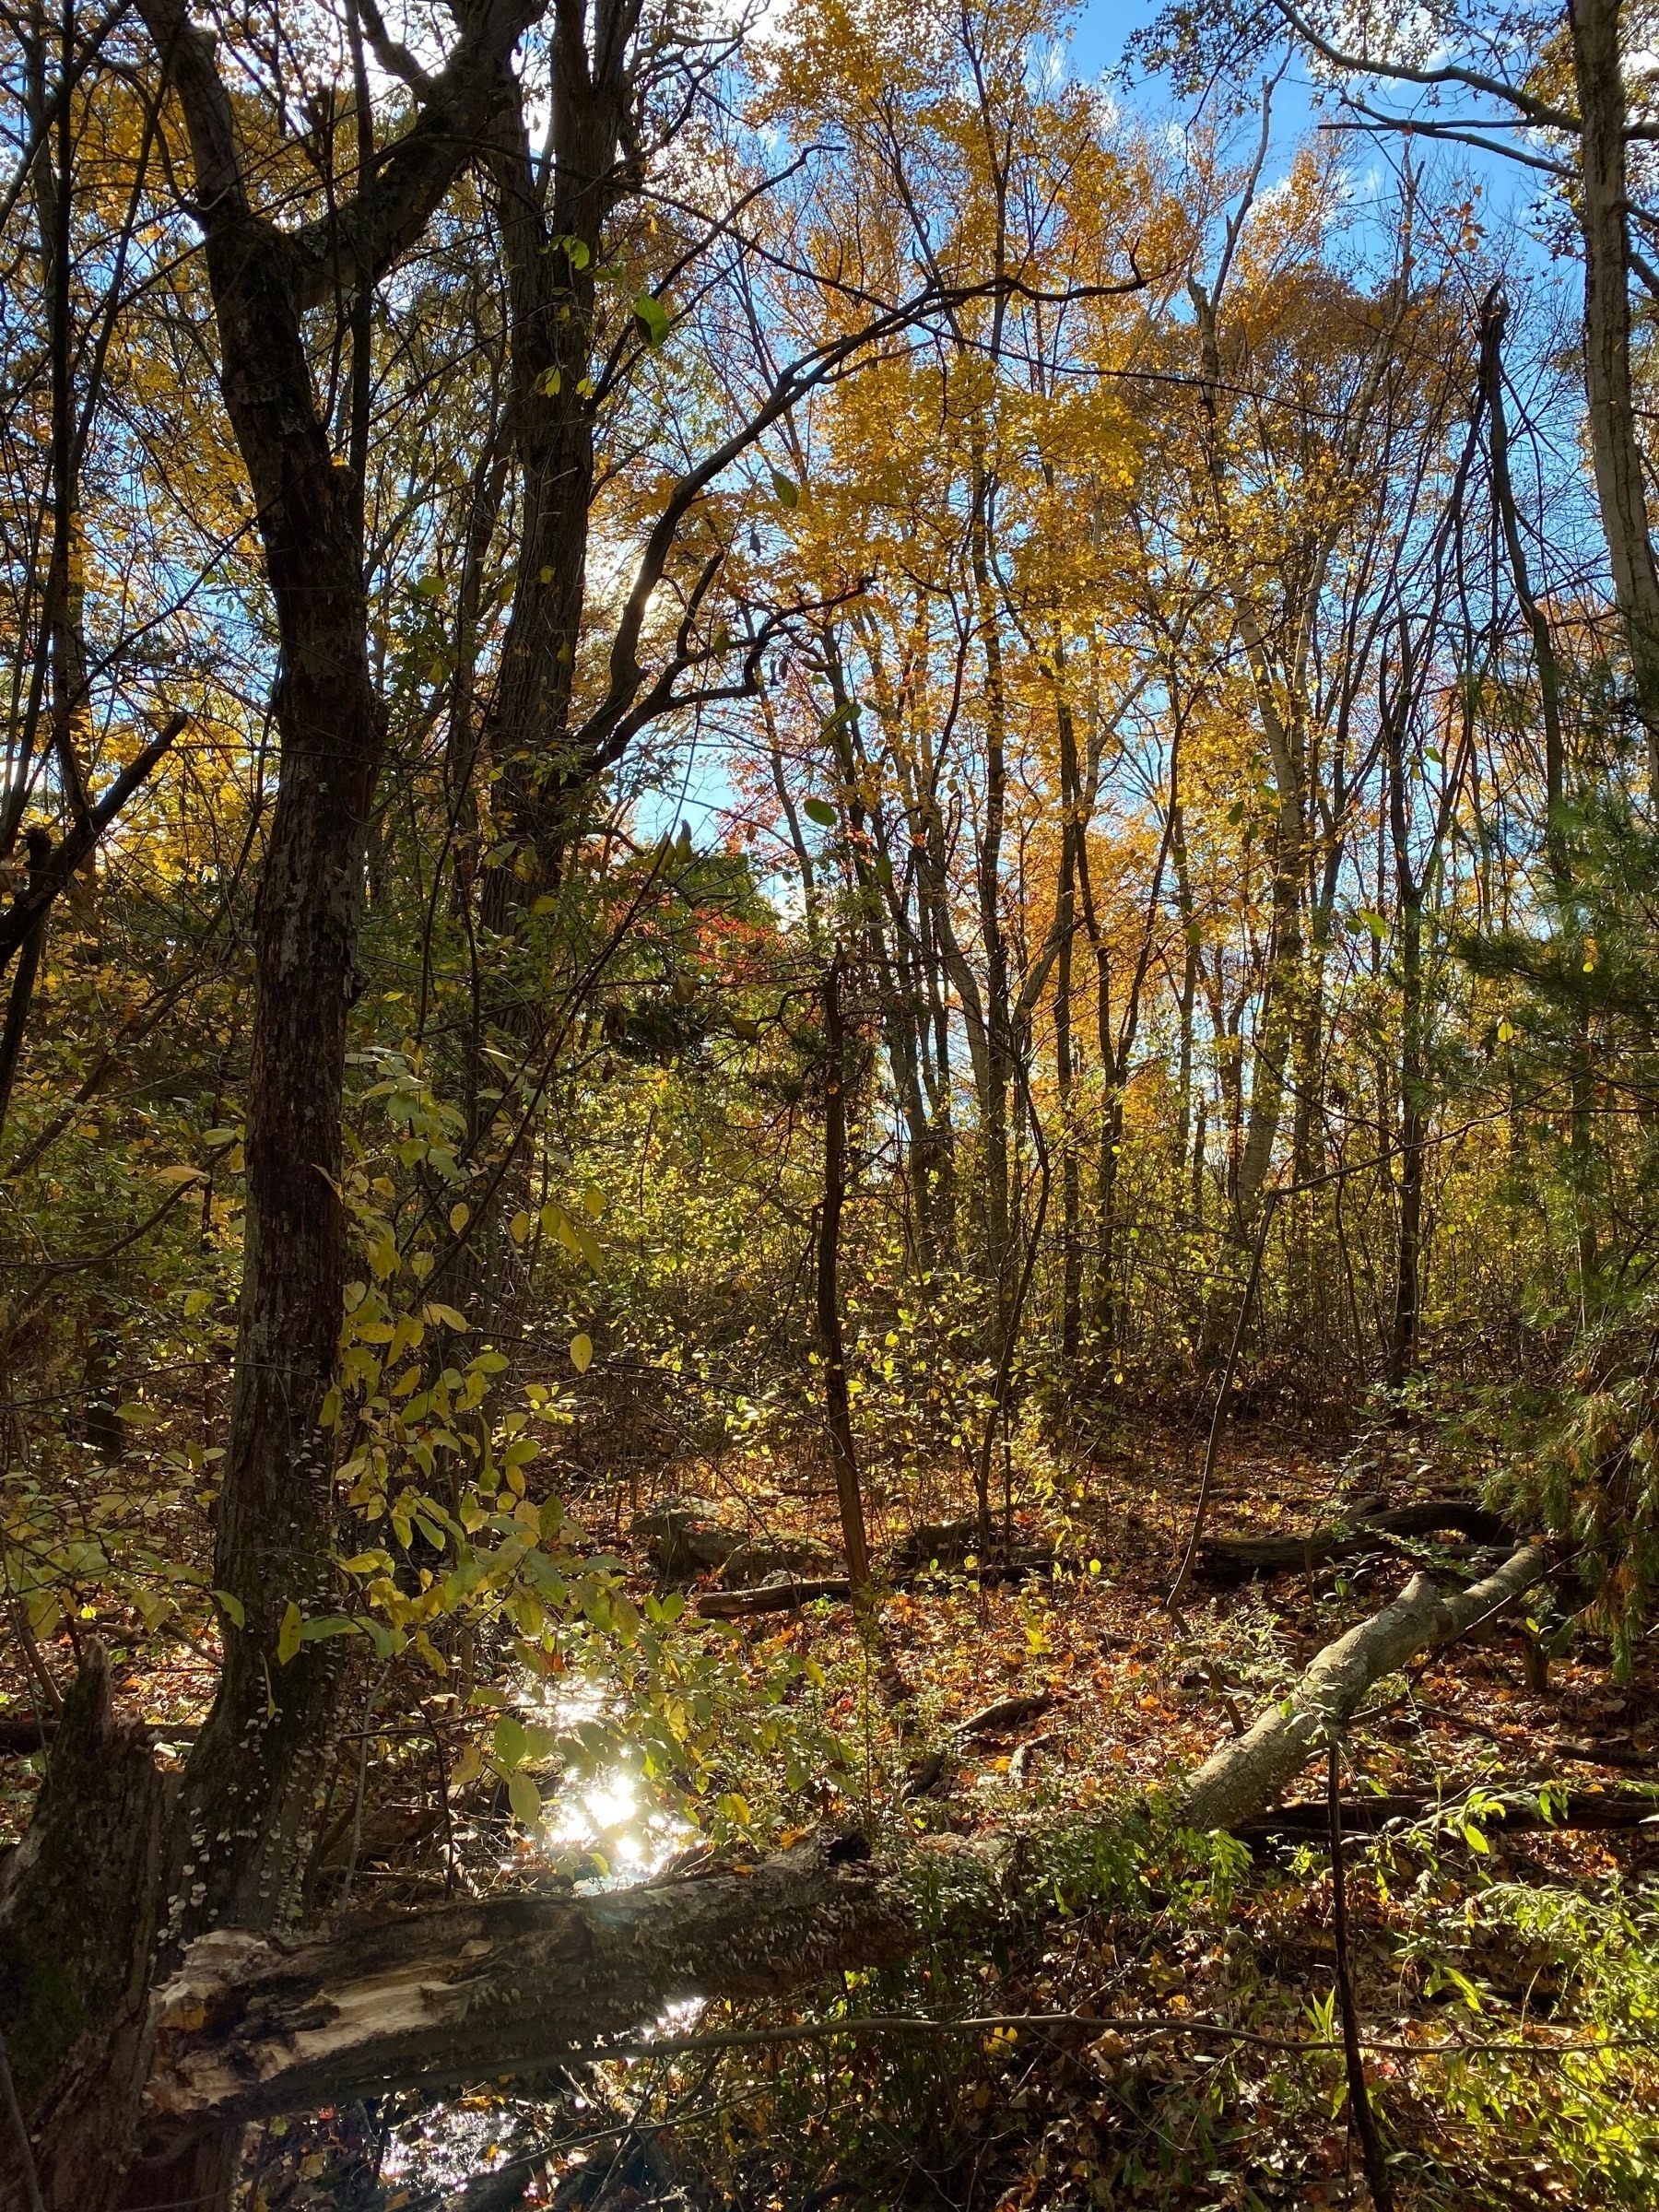 View of a small stream surrounded by trees with yellow fall foliage.